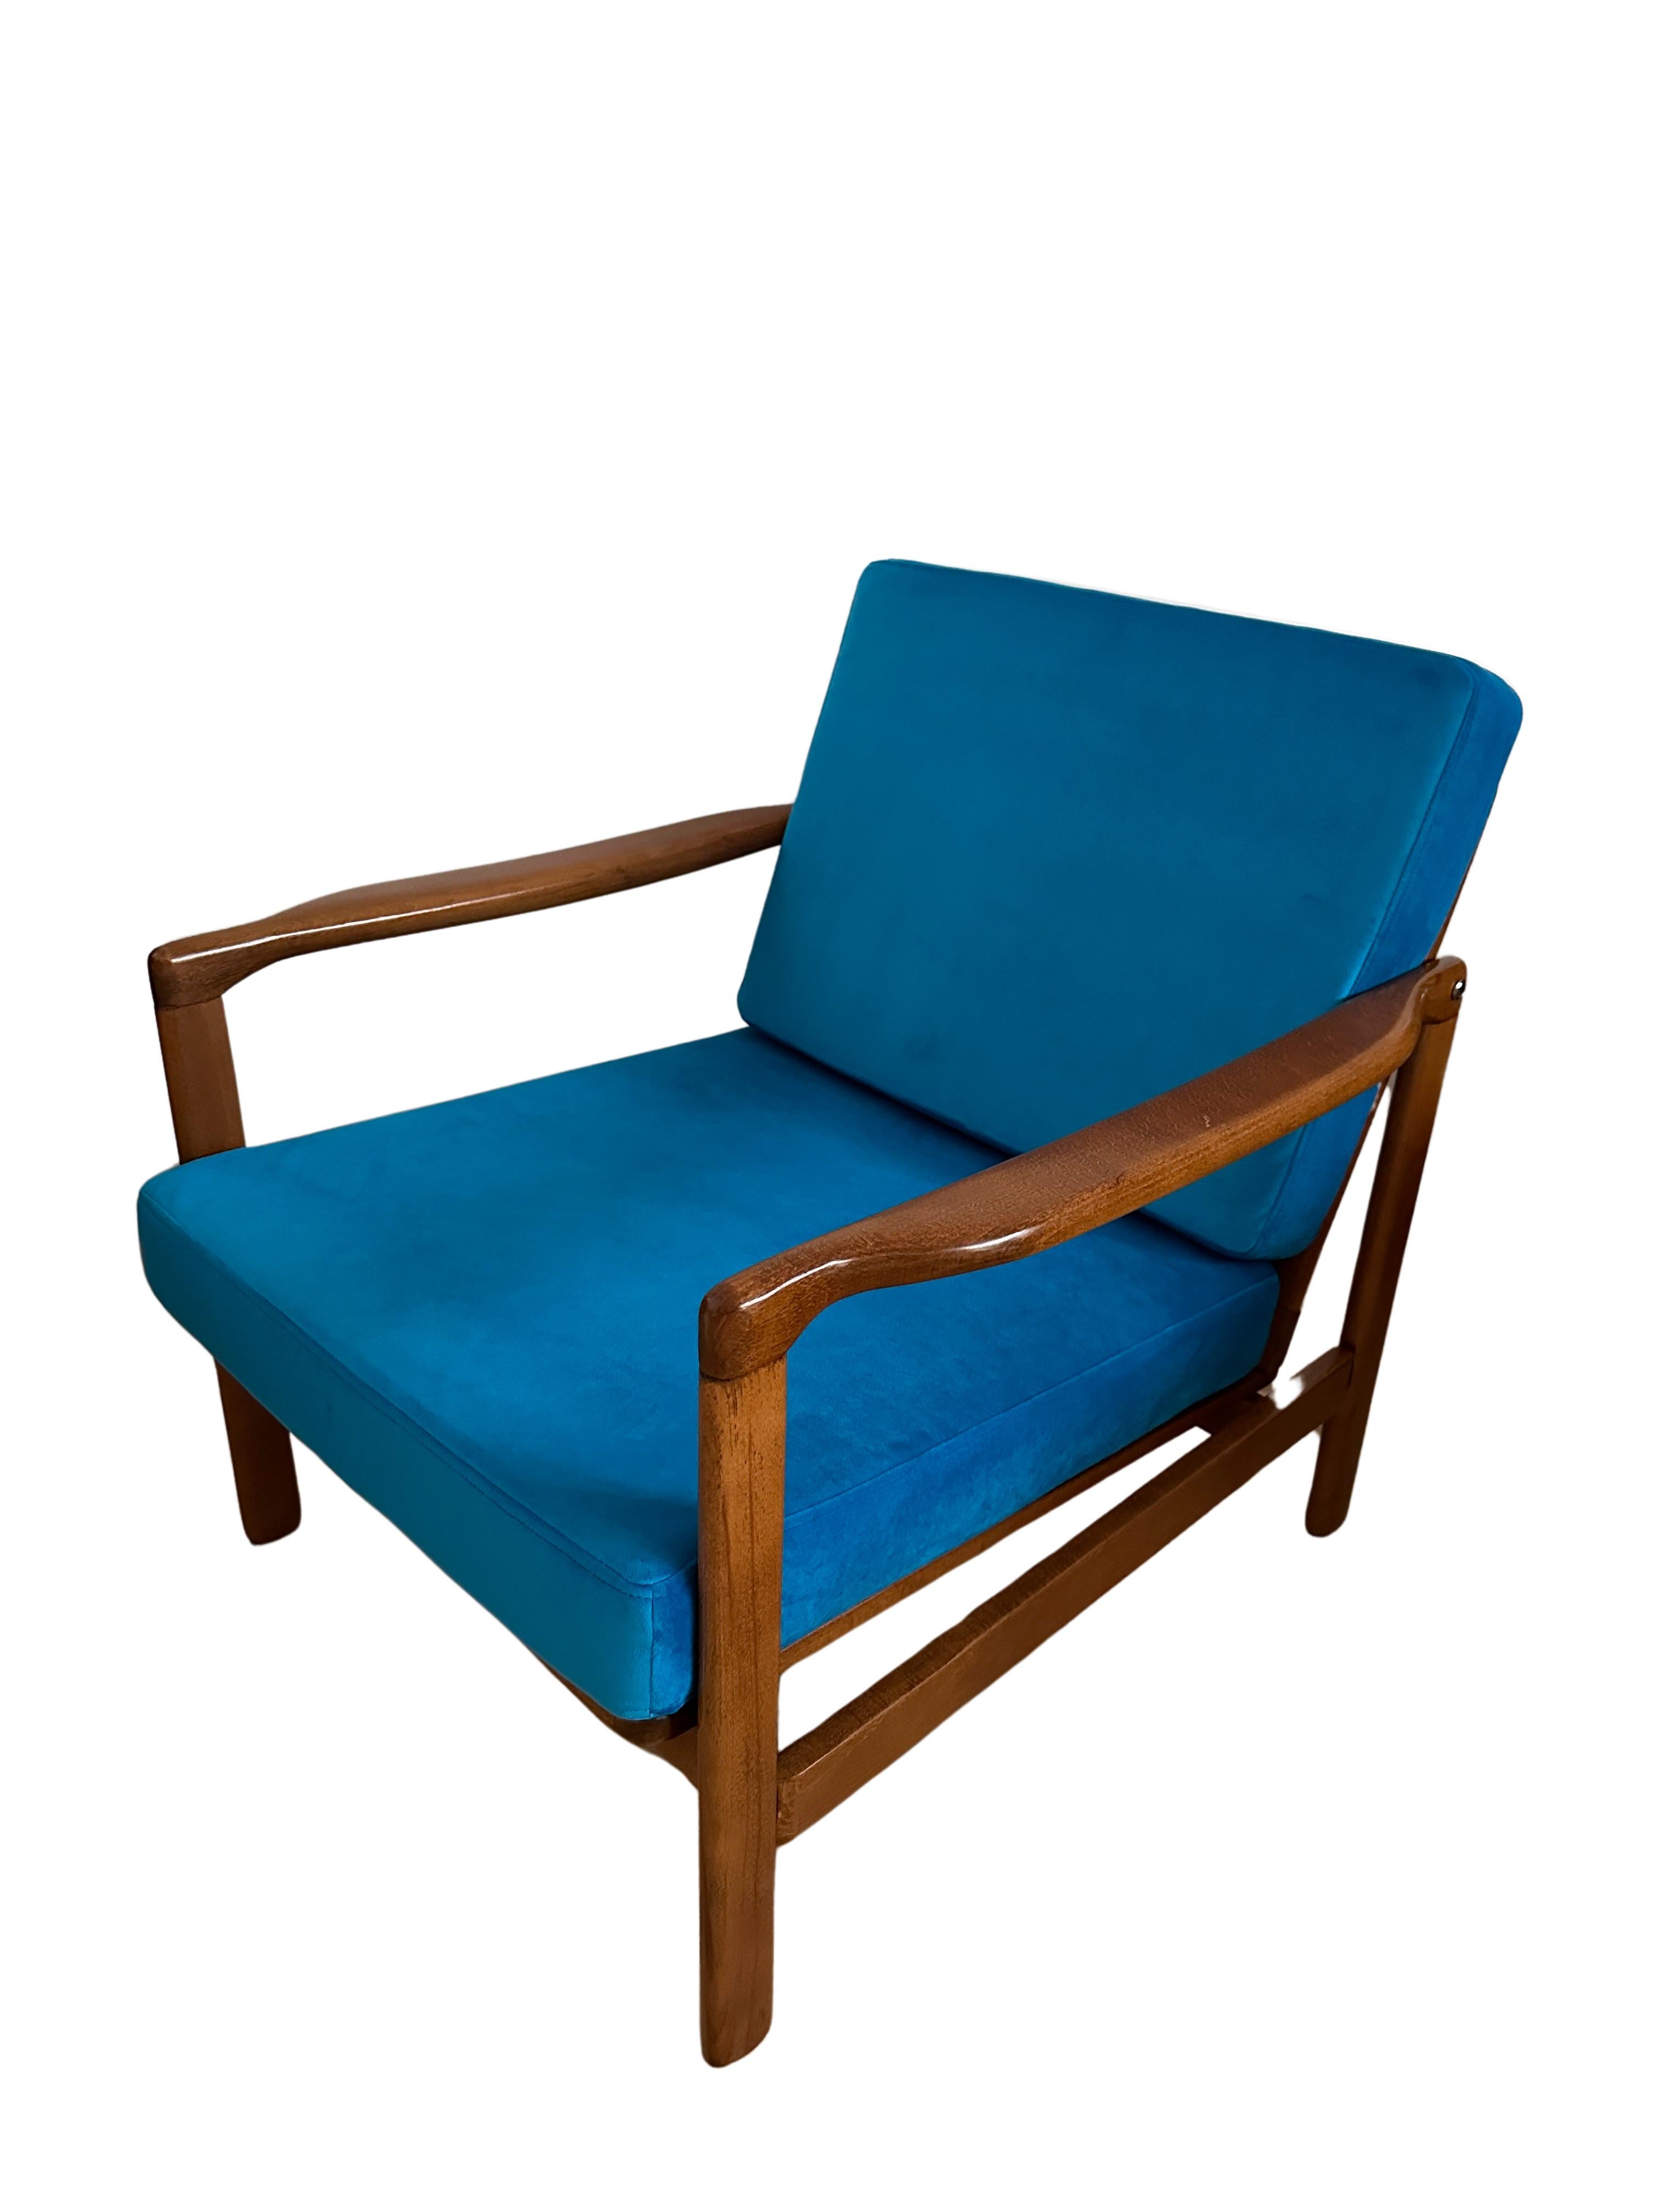 Set of Two Midcentury Armchairs, Blue Velvet Upholstery, Poland, 1960s For Sale 2